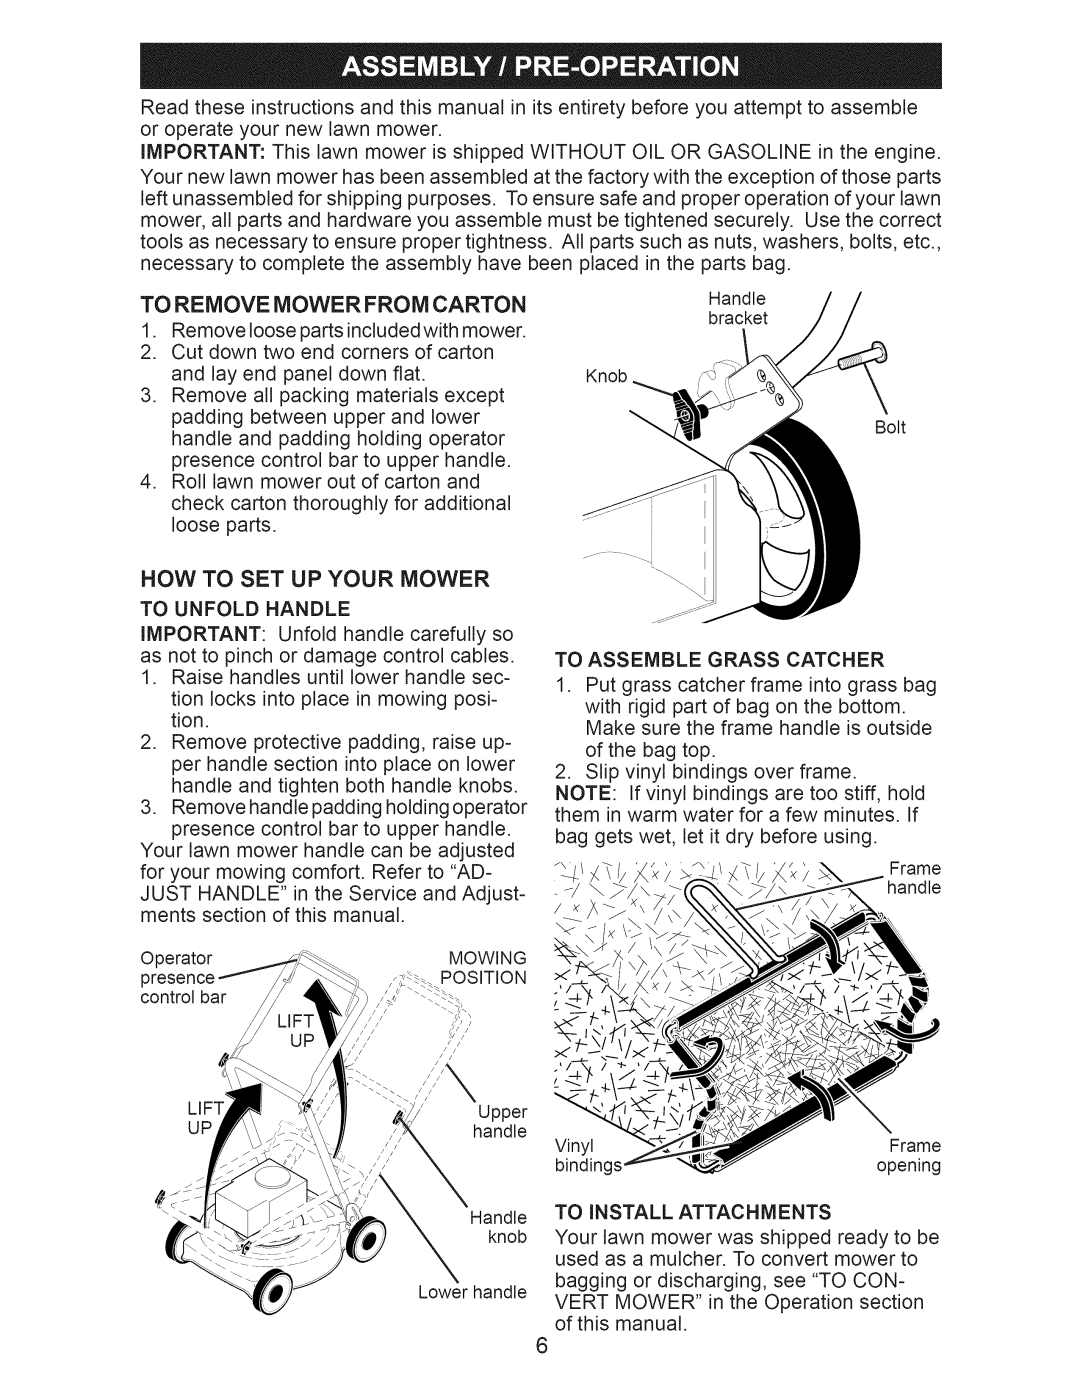 Craftsman 917.374090 manual To Remove Mower From Carton, Now To Set Up Your Mower 